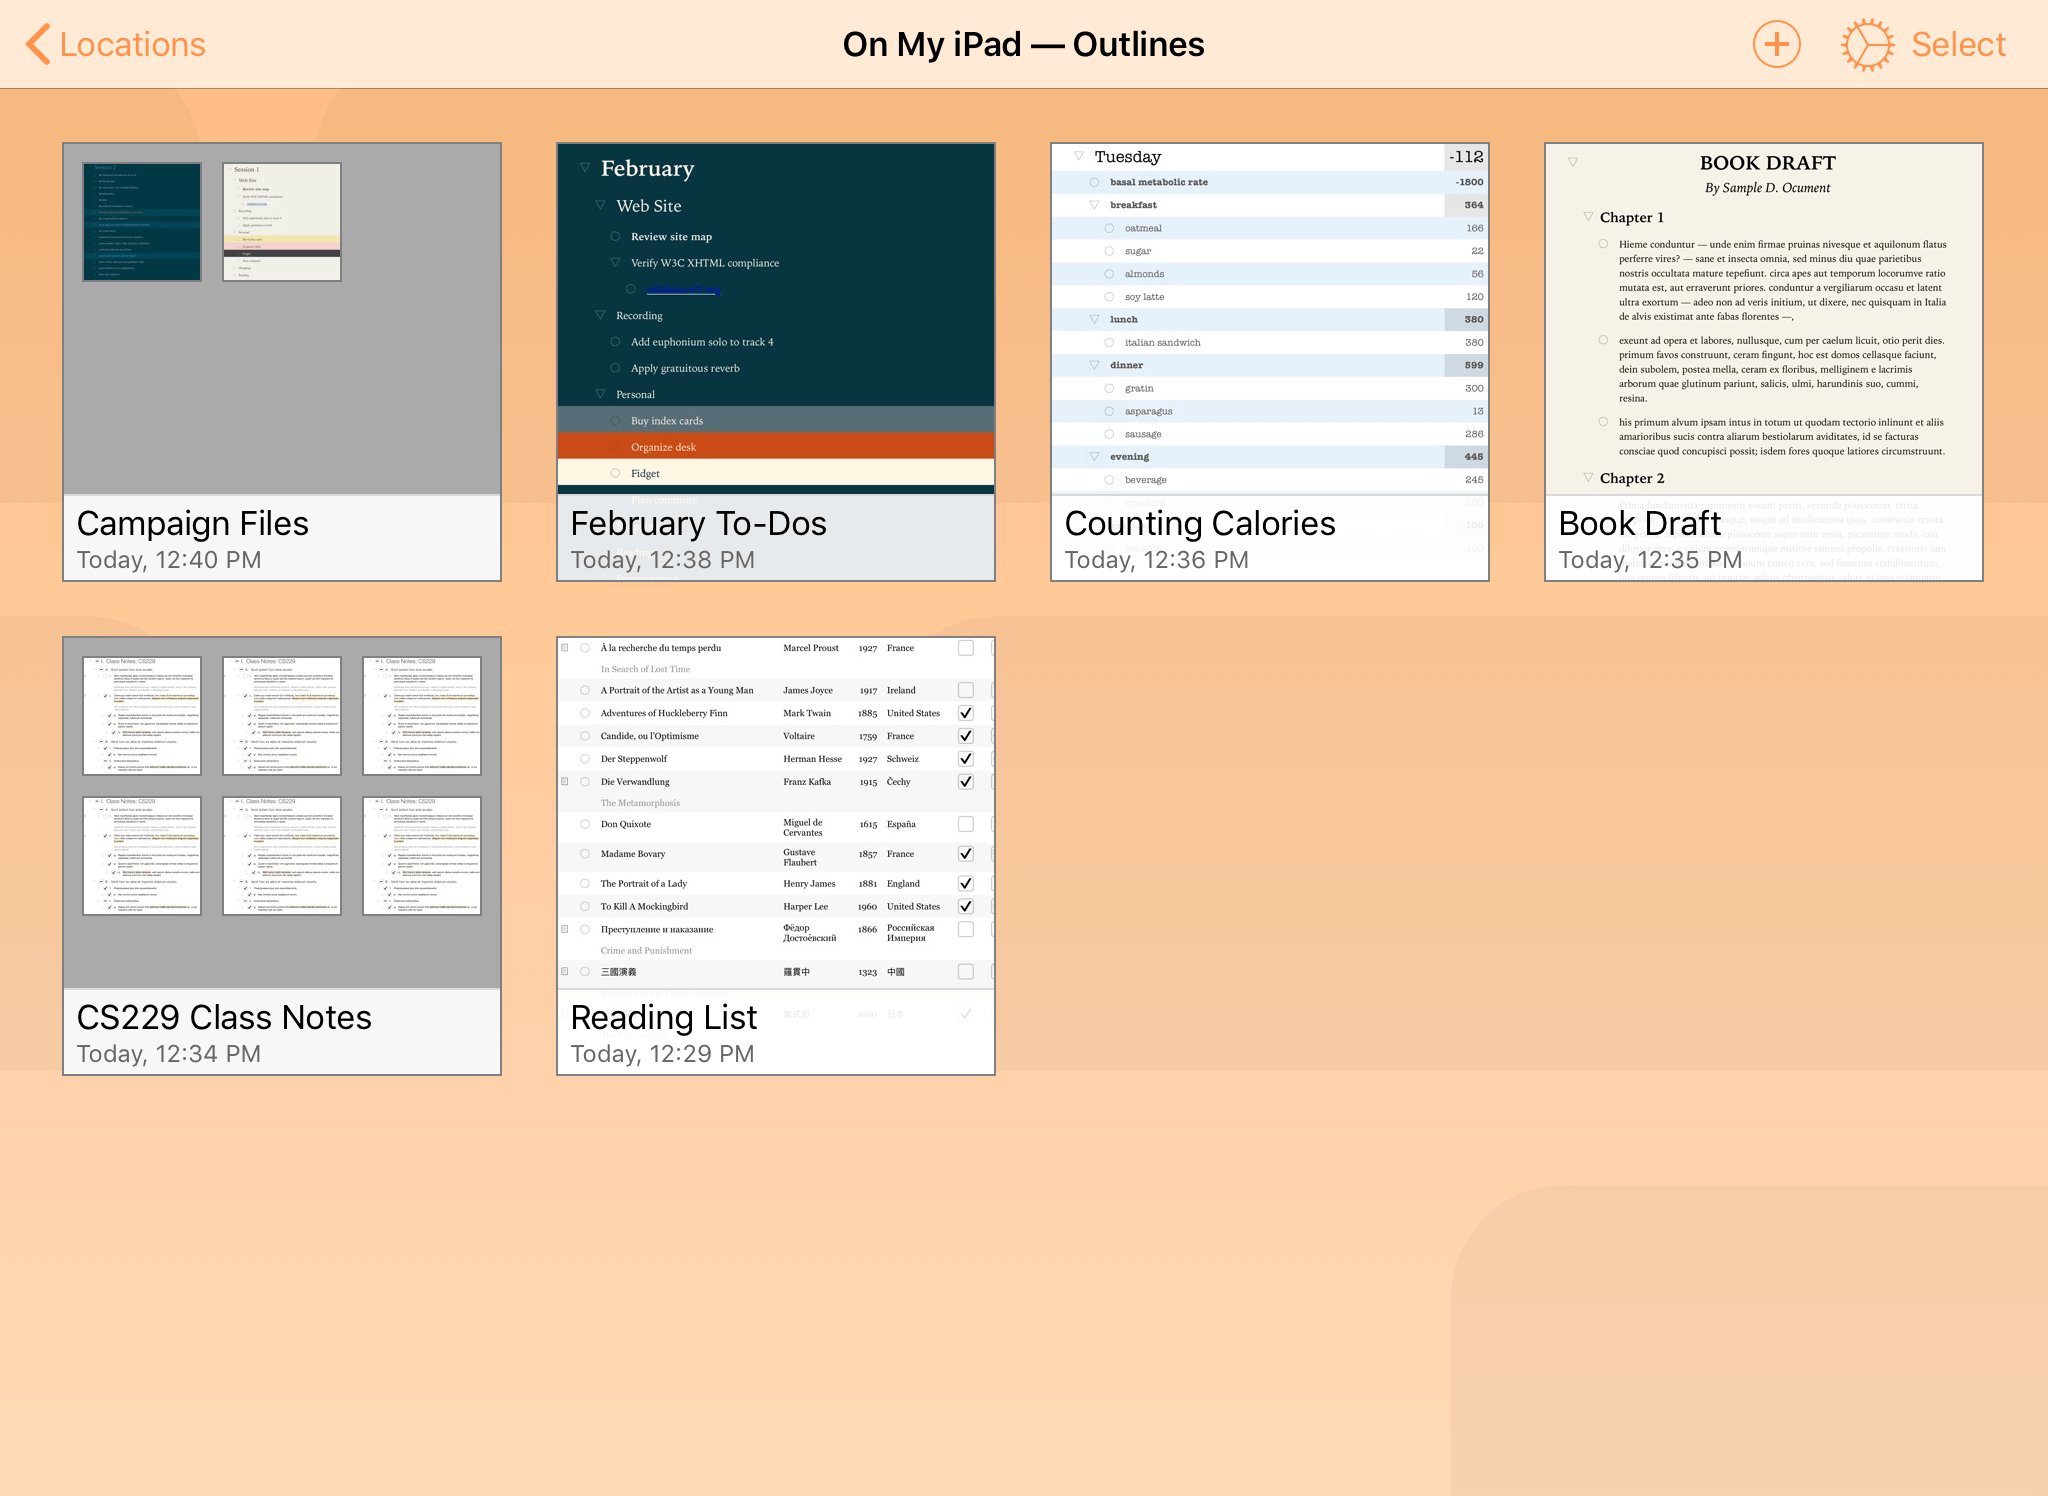 The On My iPad folder, as viewed in the Document Browser